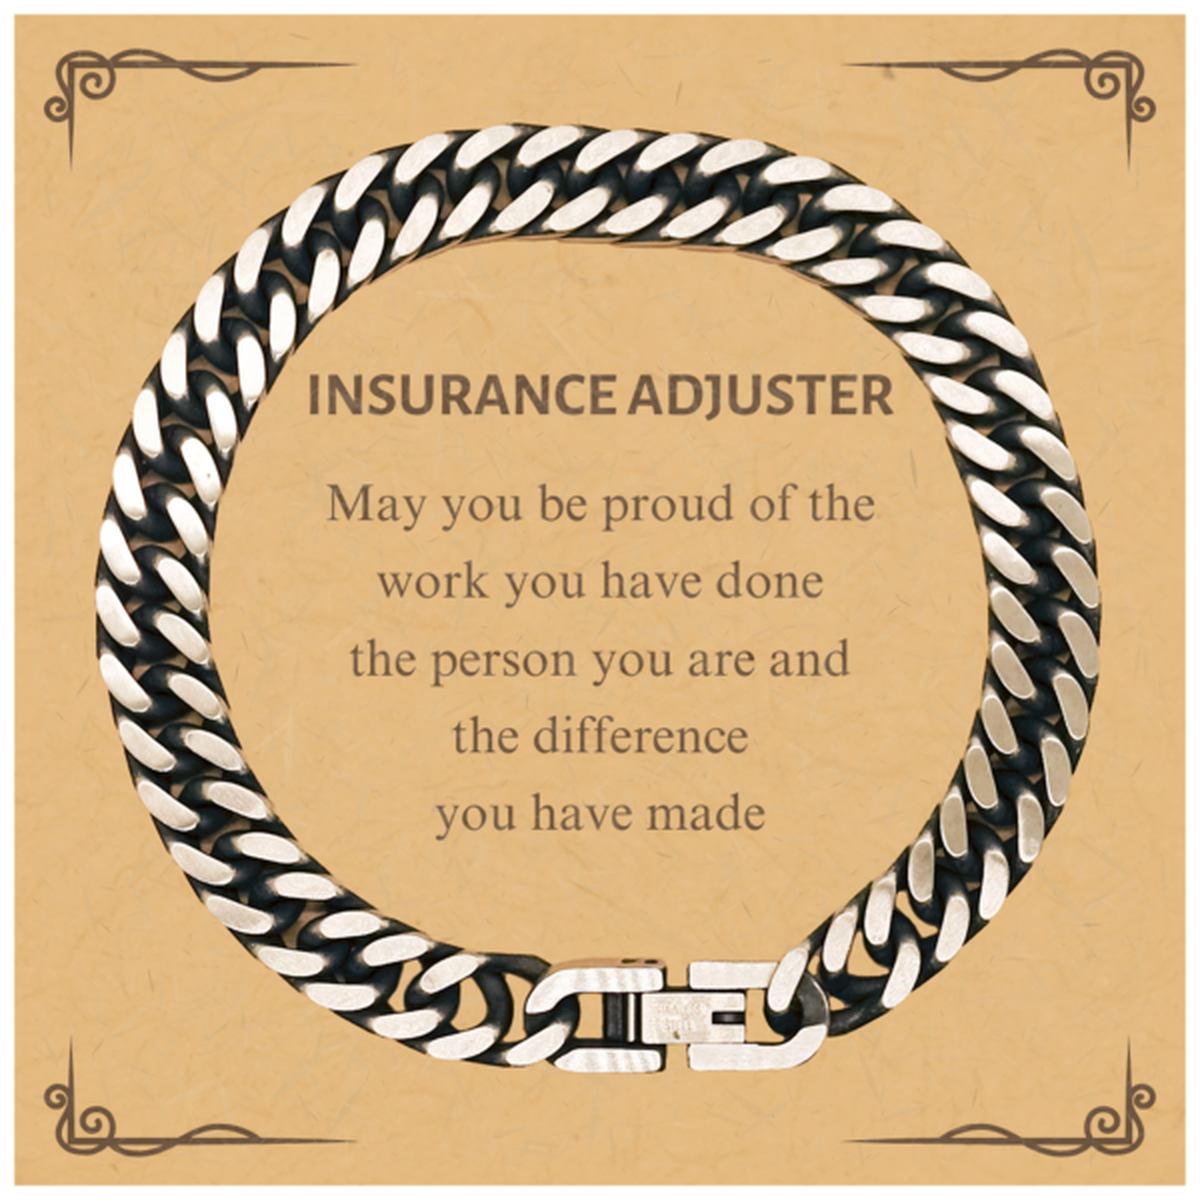 Insurance Adjuster May you be proud of the work you have done, Retirement Insurance Adjuster Cuban Link Chain Bracelet for Colleague Appreciation Gifts Amazing for Insurance Adjuster